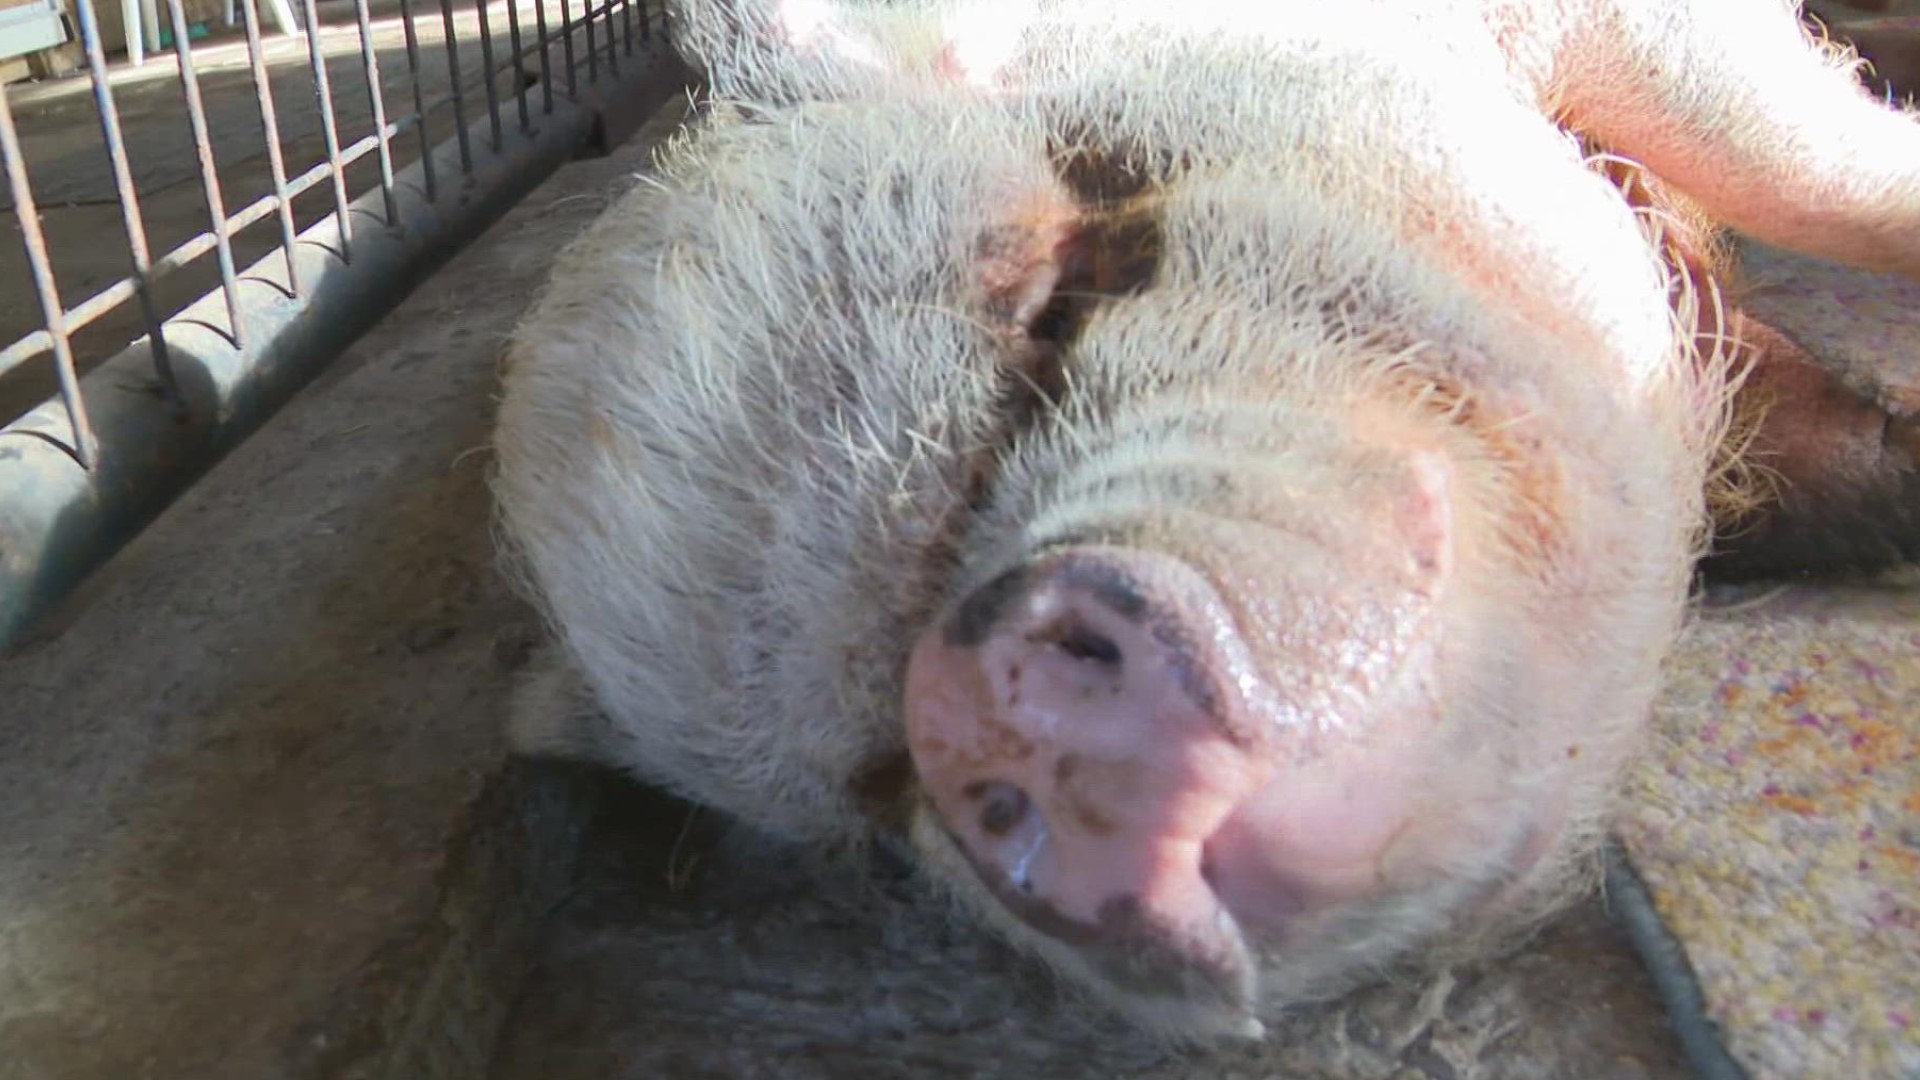 Oinking Acres Farm & Rescue Sanctuary is not only finding new families for these pet pigs, but also trying to educate the public about farm animal rescue.